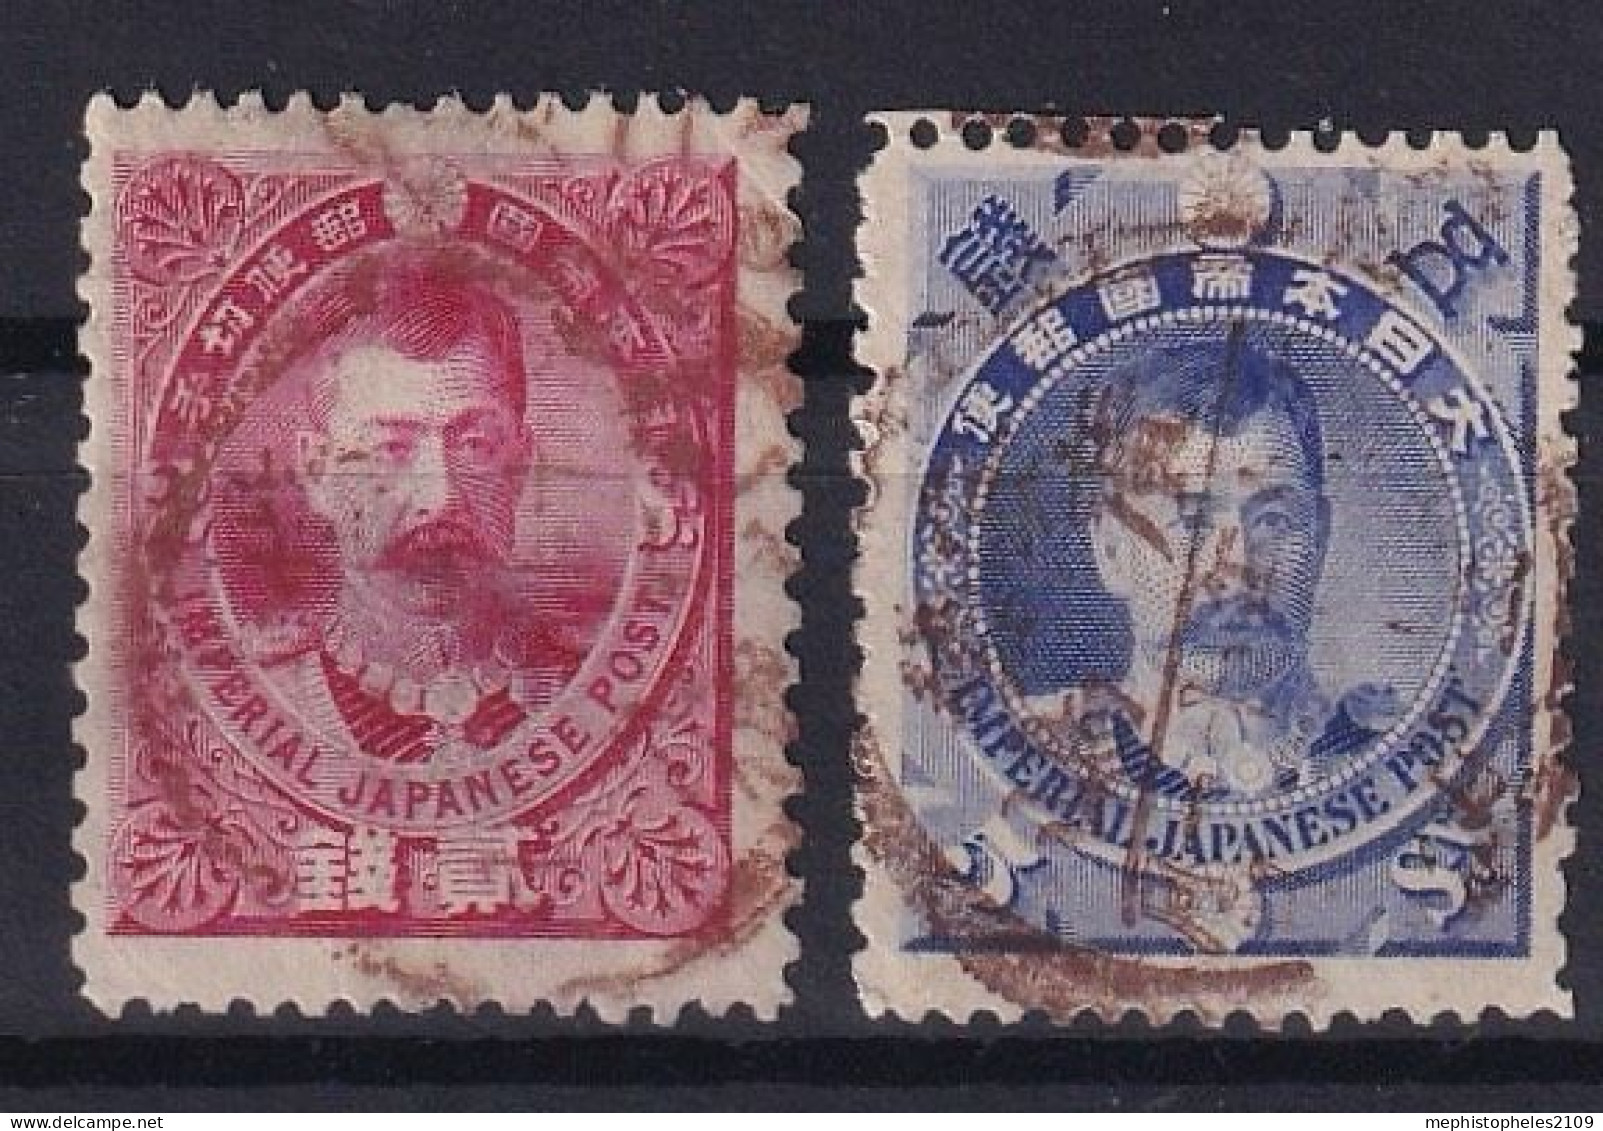 JAPAN 1896 - Canceled - Sc# 87, 88 - Used Stamps